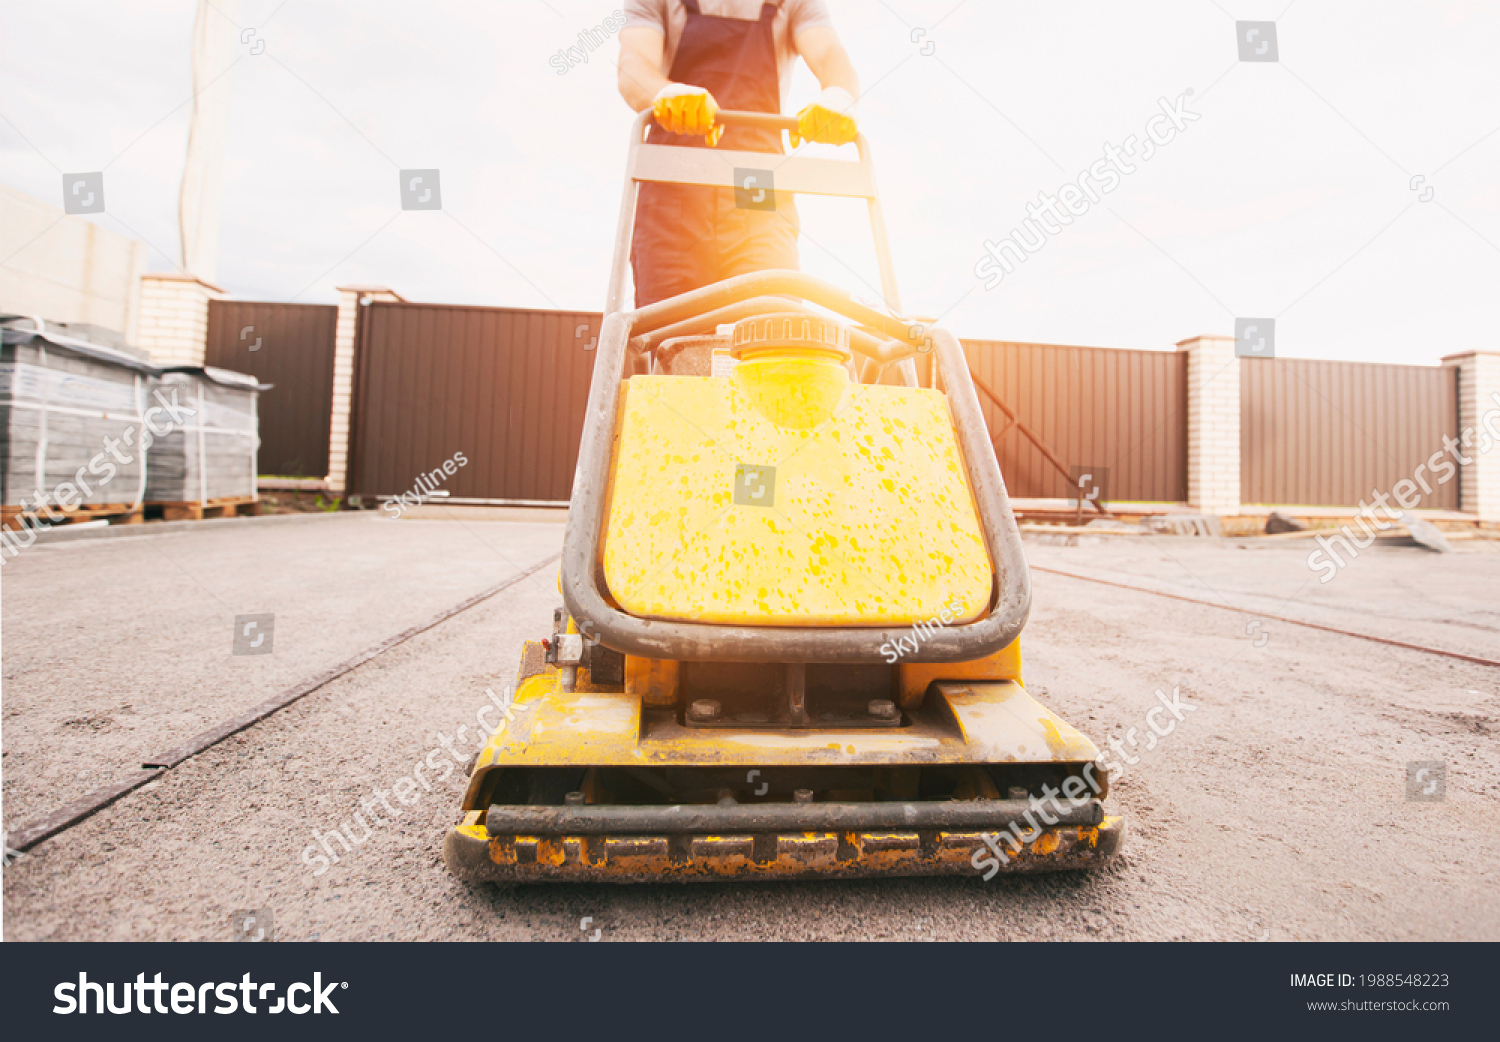 The worker tamping a gravel by the vibration plate #1988548223